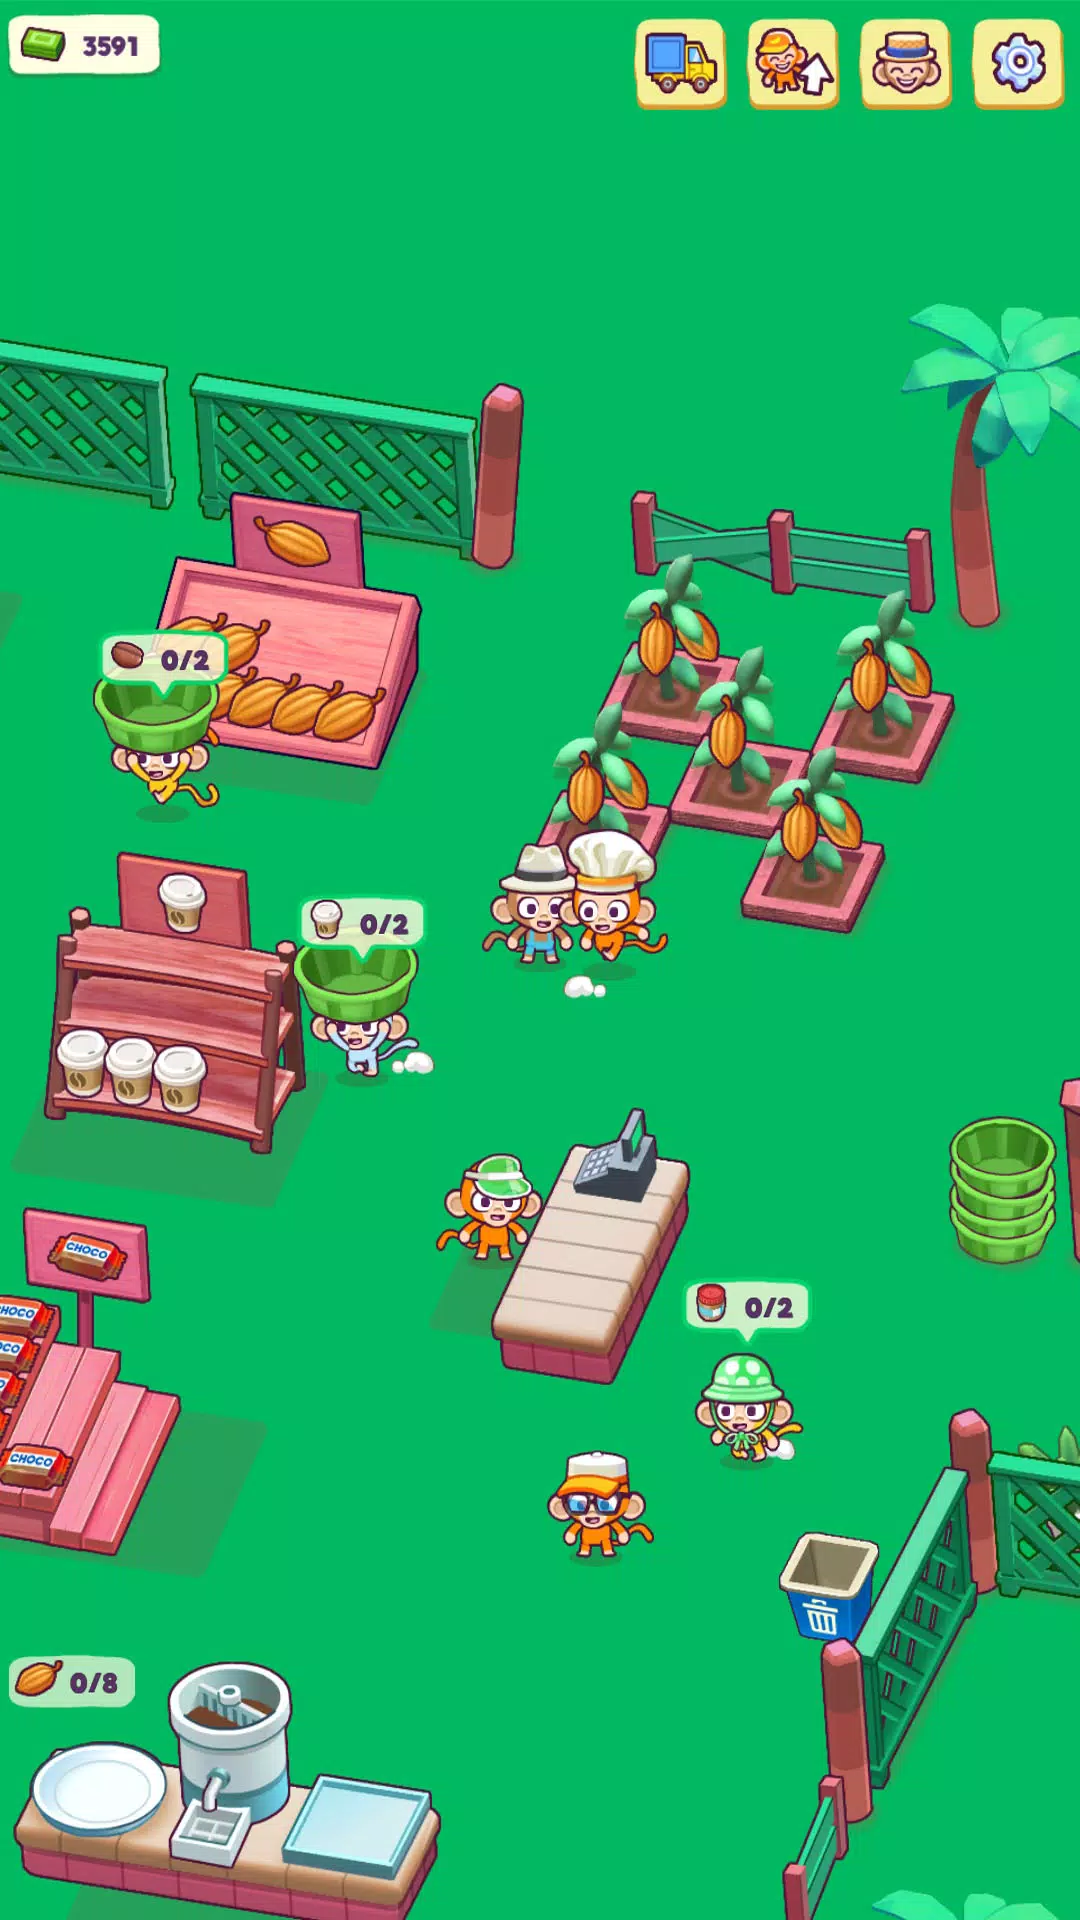 Monkey Mart for Android - Download the APK from Uptodown